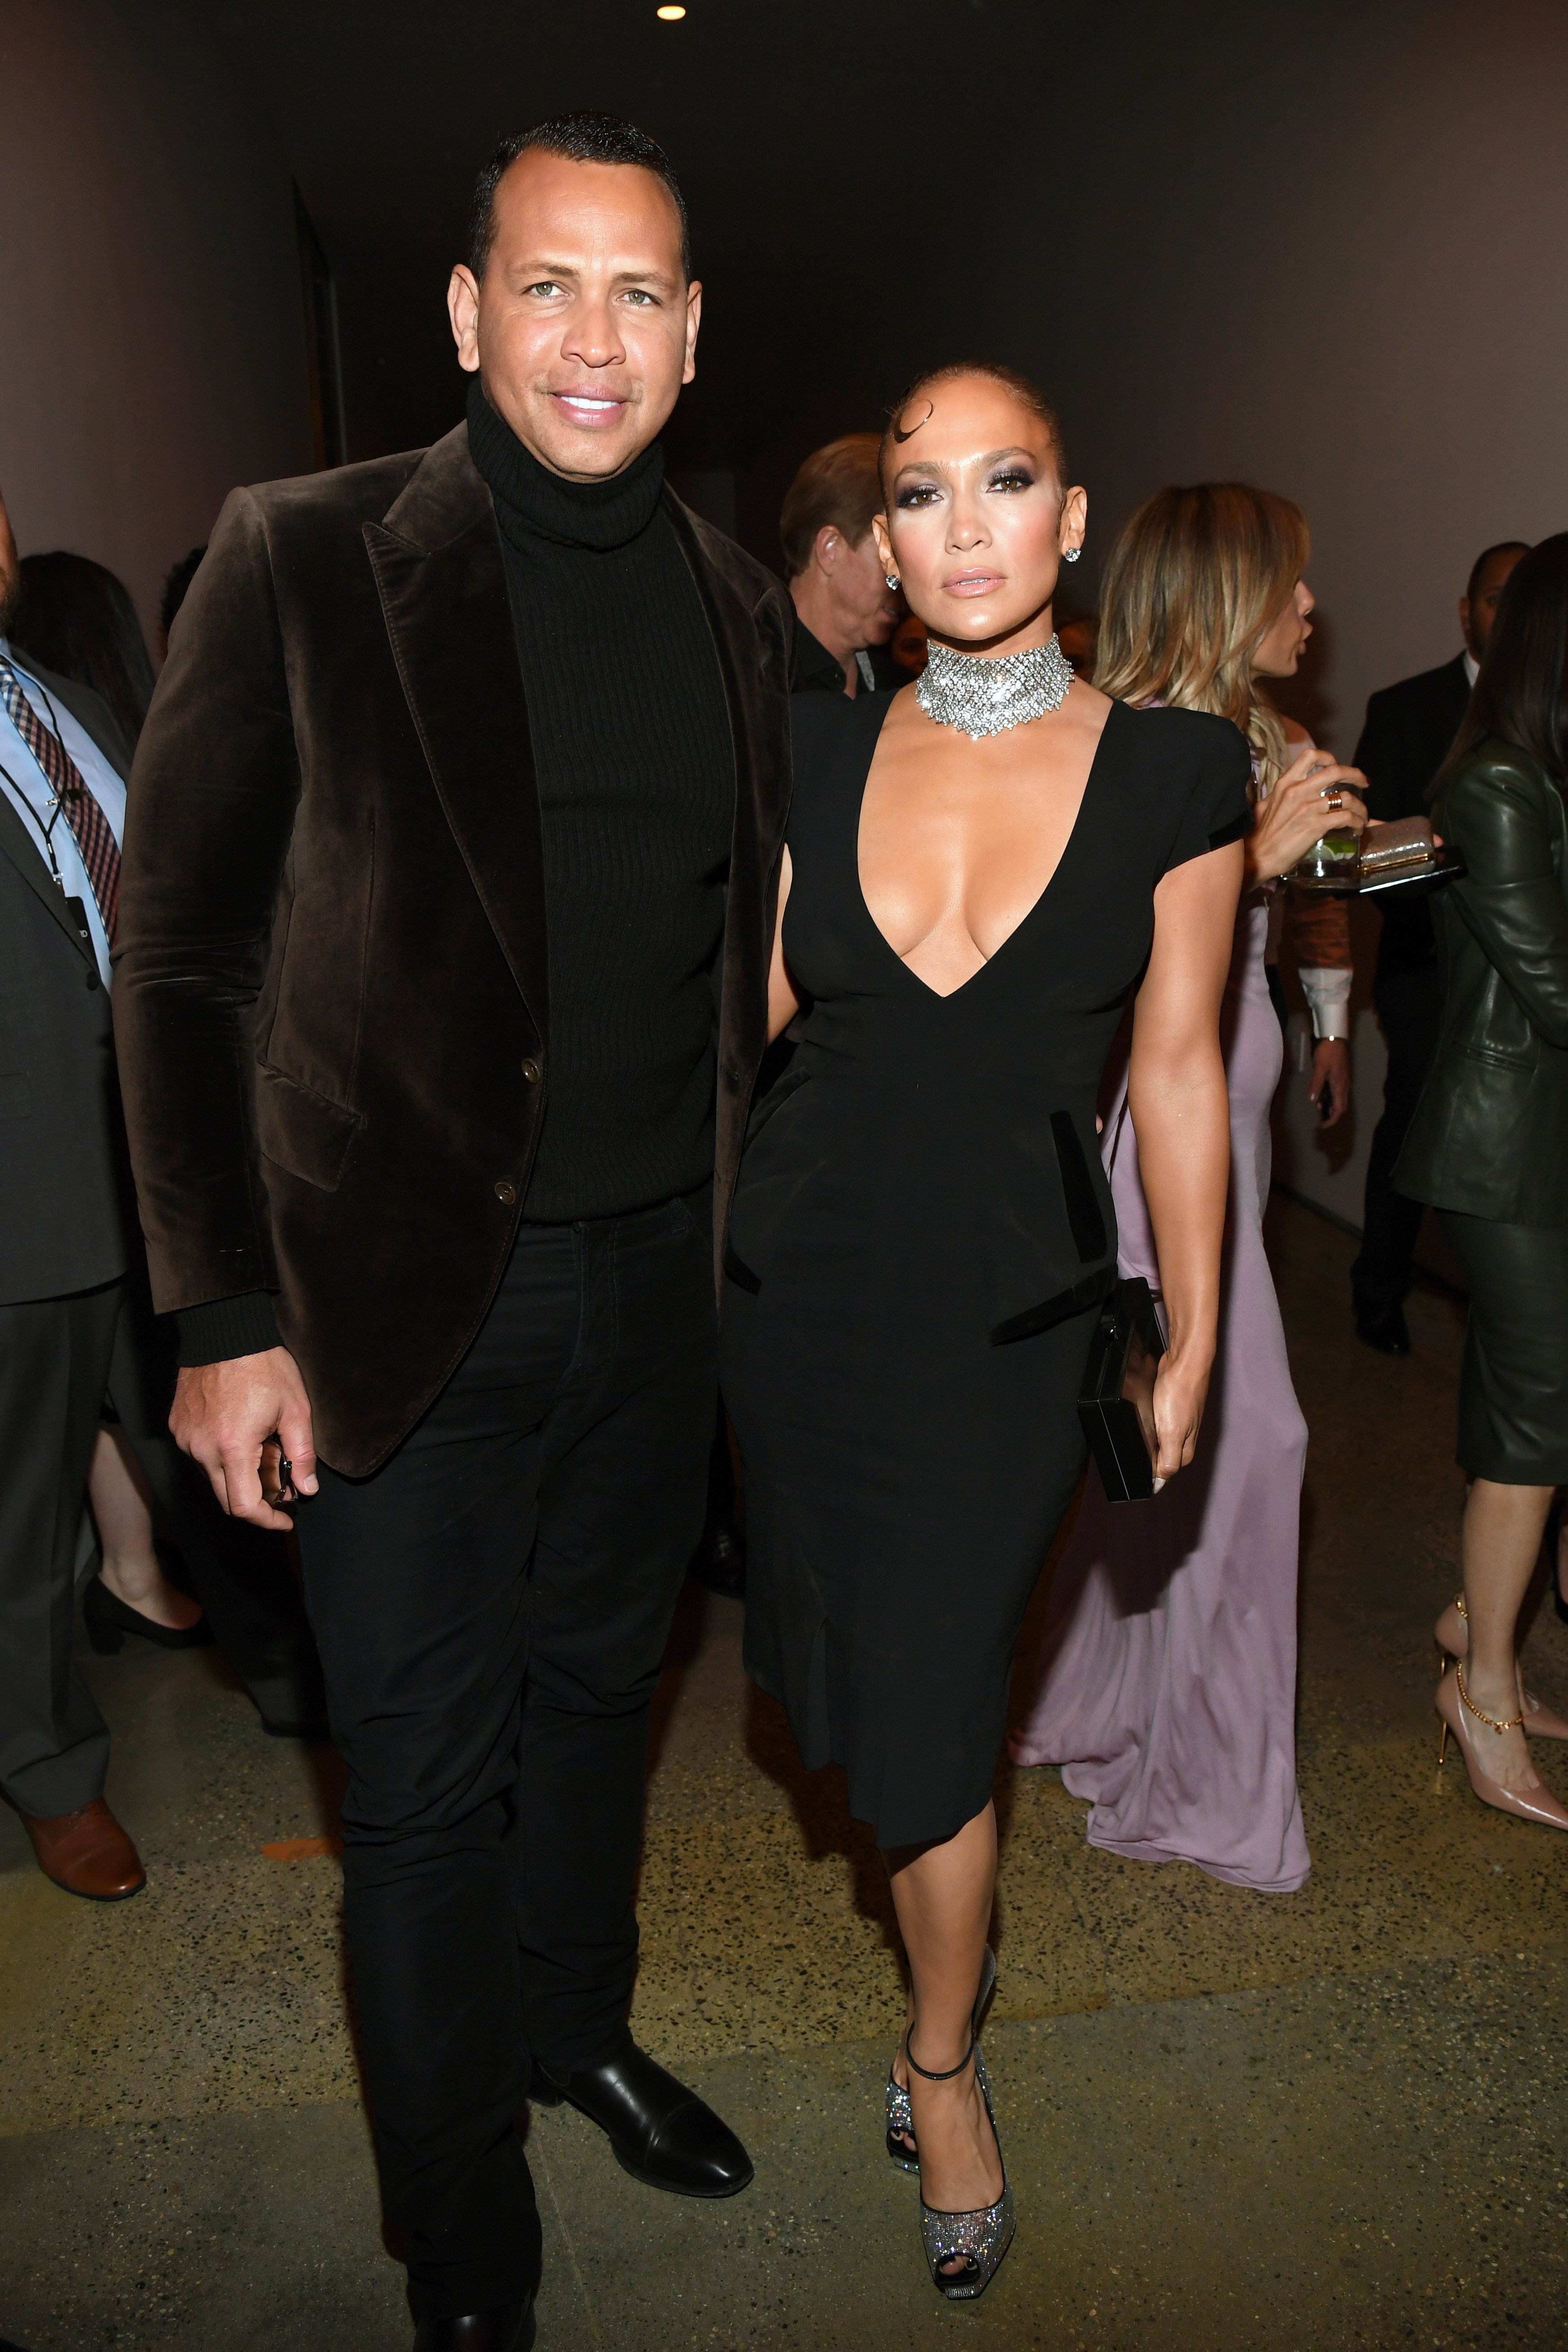 Alex Rodriguez and Jennifer Lopez attend the Tom Ford AW20 Show at Milk Studios on February 07, 2020, in Hollywood, California. | Source: Getty Images.